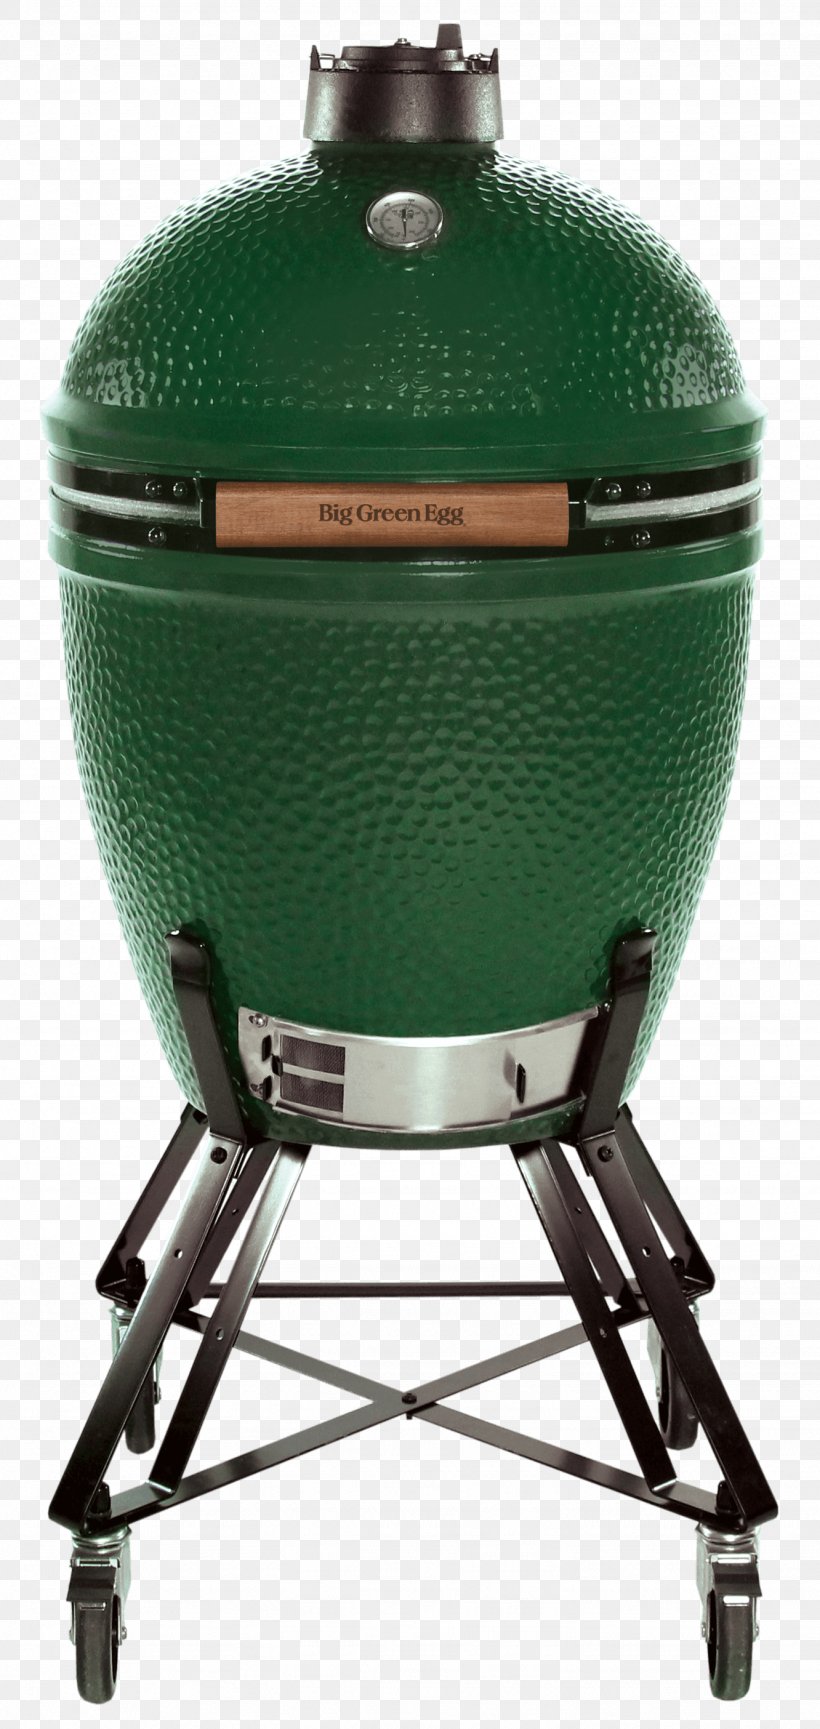 Barbecue Kamado Big Green Egg Large Grilling, PNG, 1332x2809px, Barbecue, Big Green Egg, Big Green Egg Large, Charcoal, Cooking Download Free